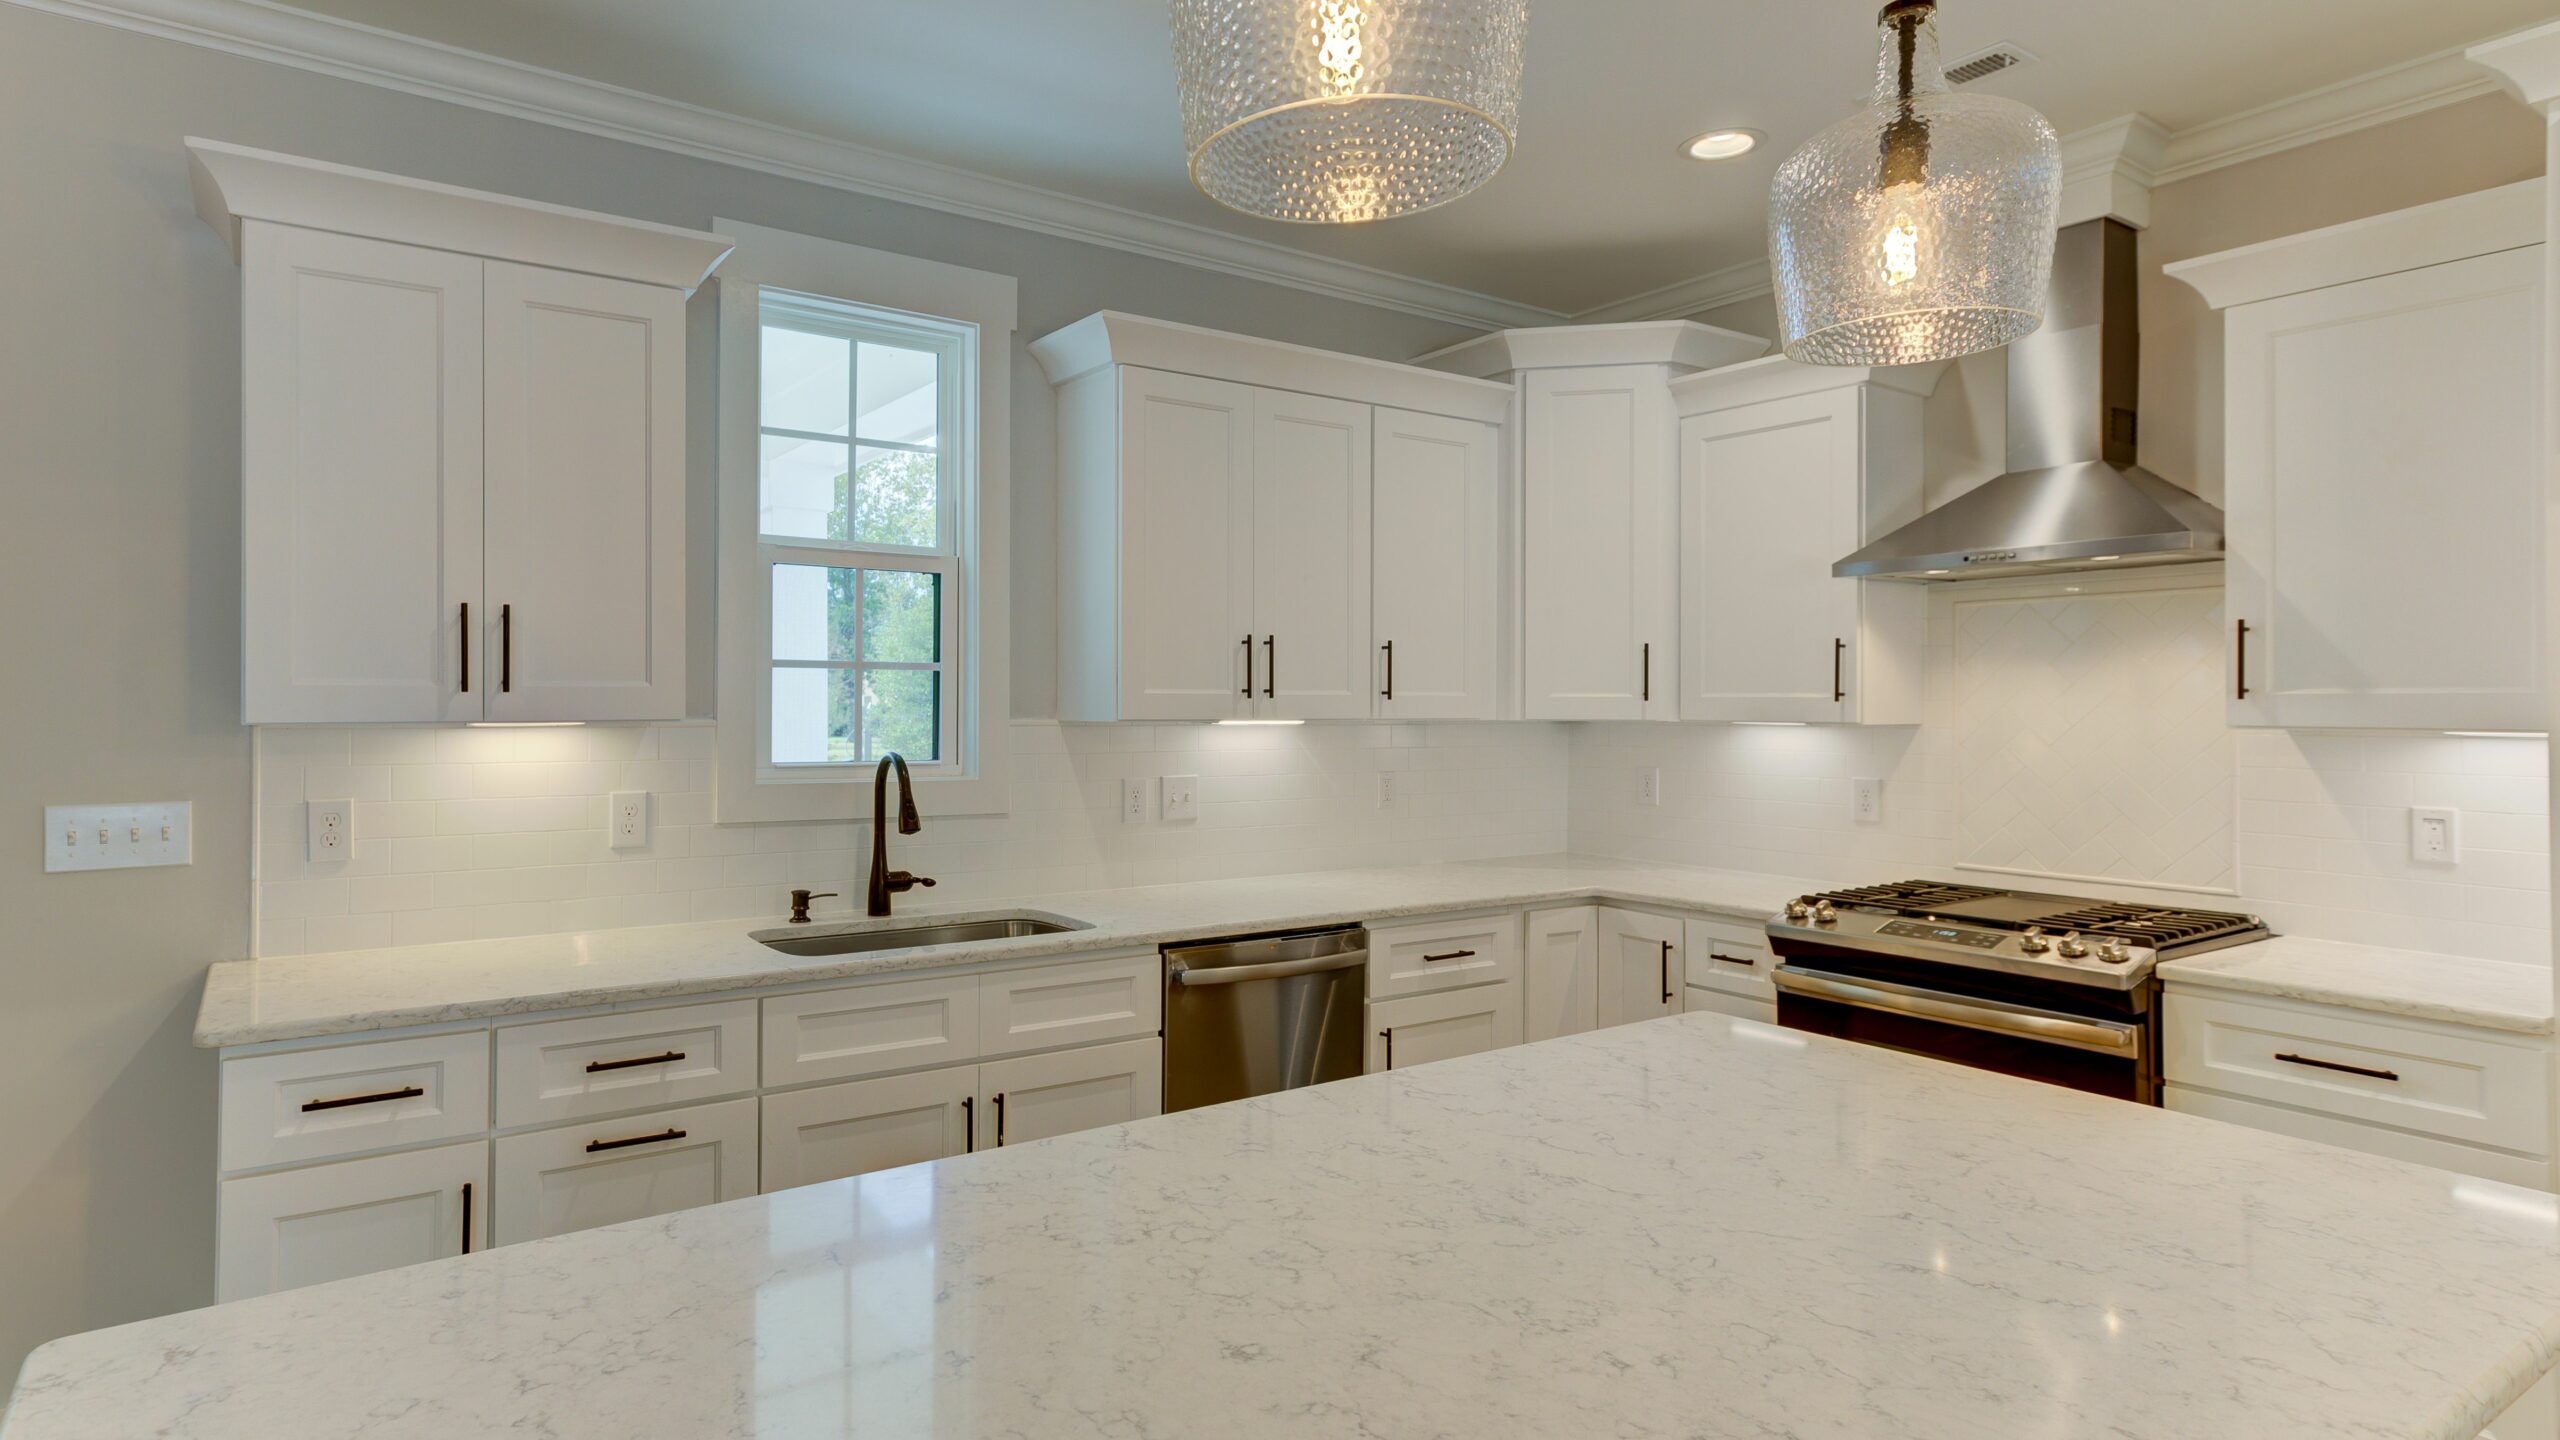 Gallery Kitchens - Airlie Homes